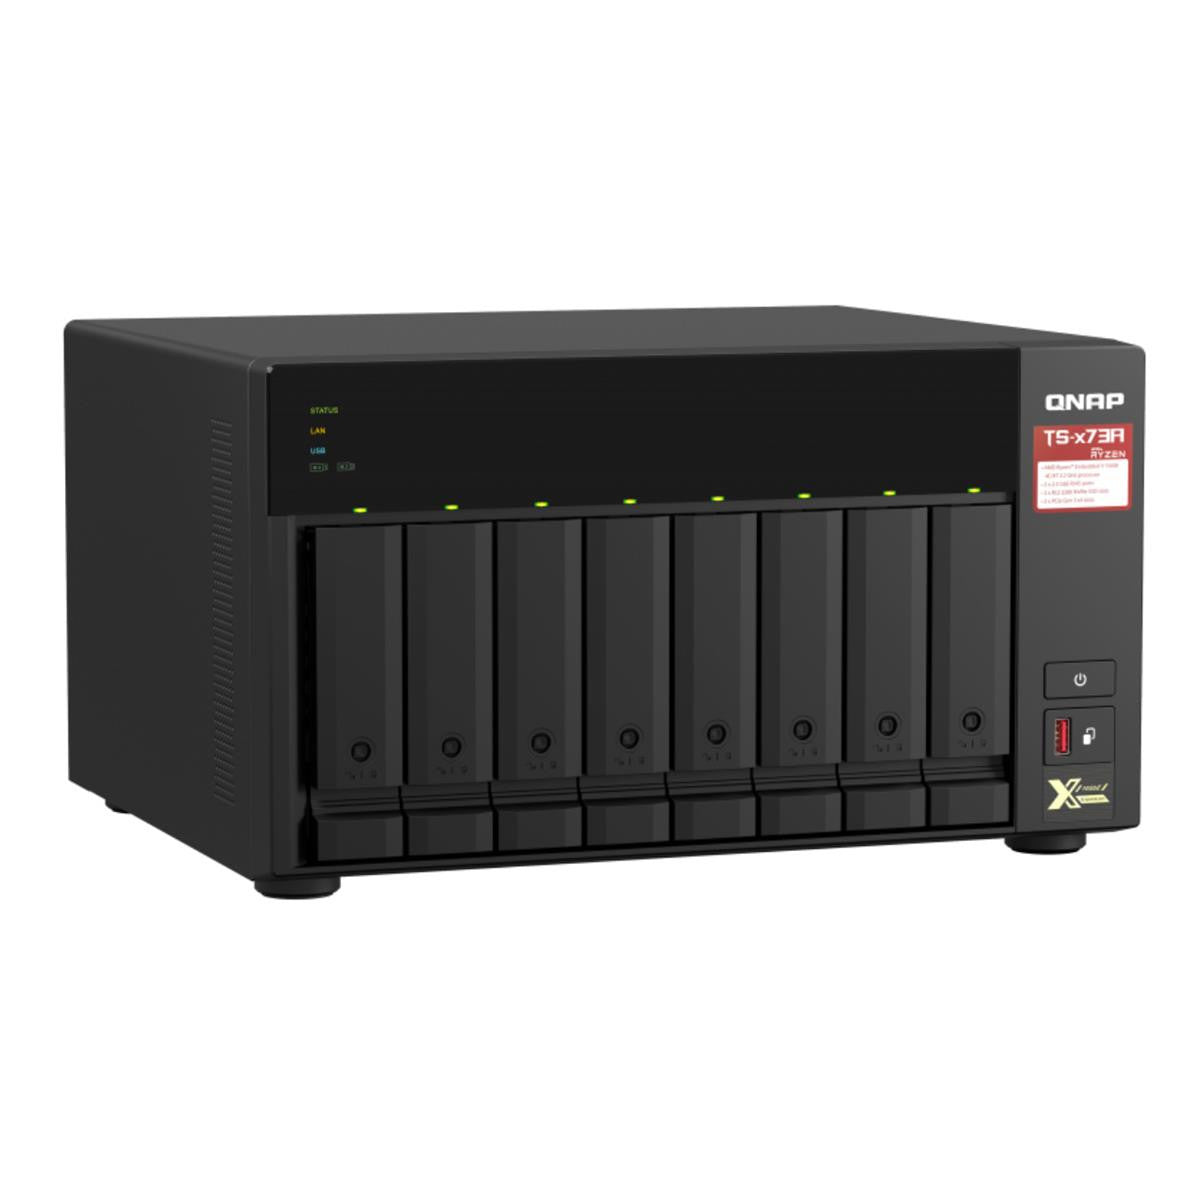 QNAP TS-873A 8-BAY NAS with 16GB DDR4 RAM and 80TB (8x10TB) Western Digital RED PLUS Drives Fully Assembled and Tested